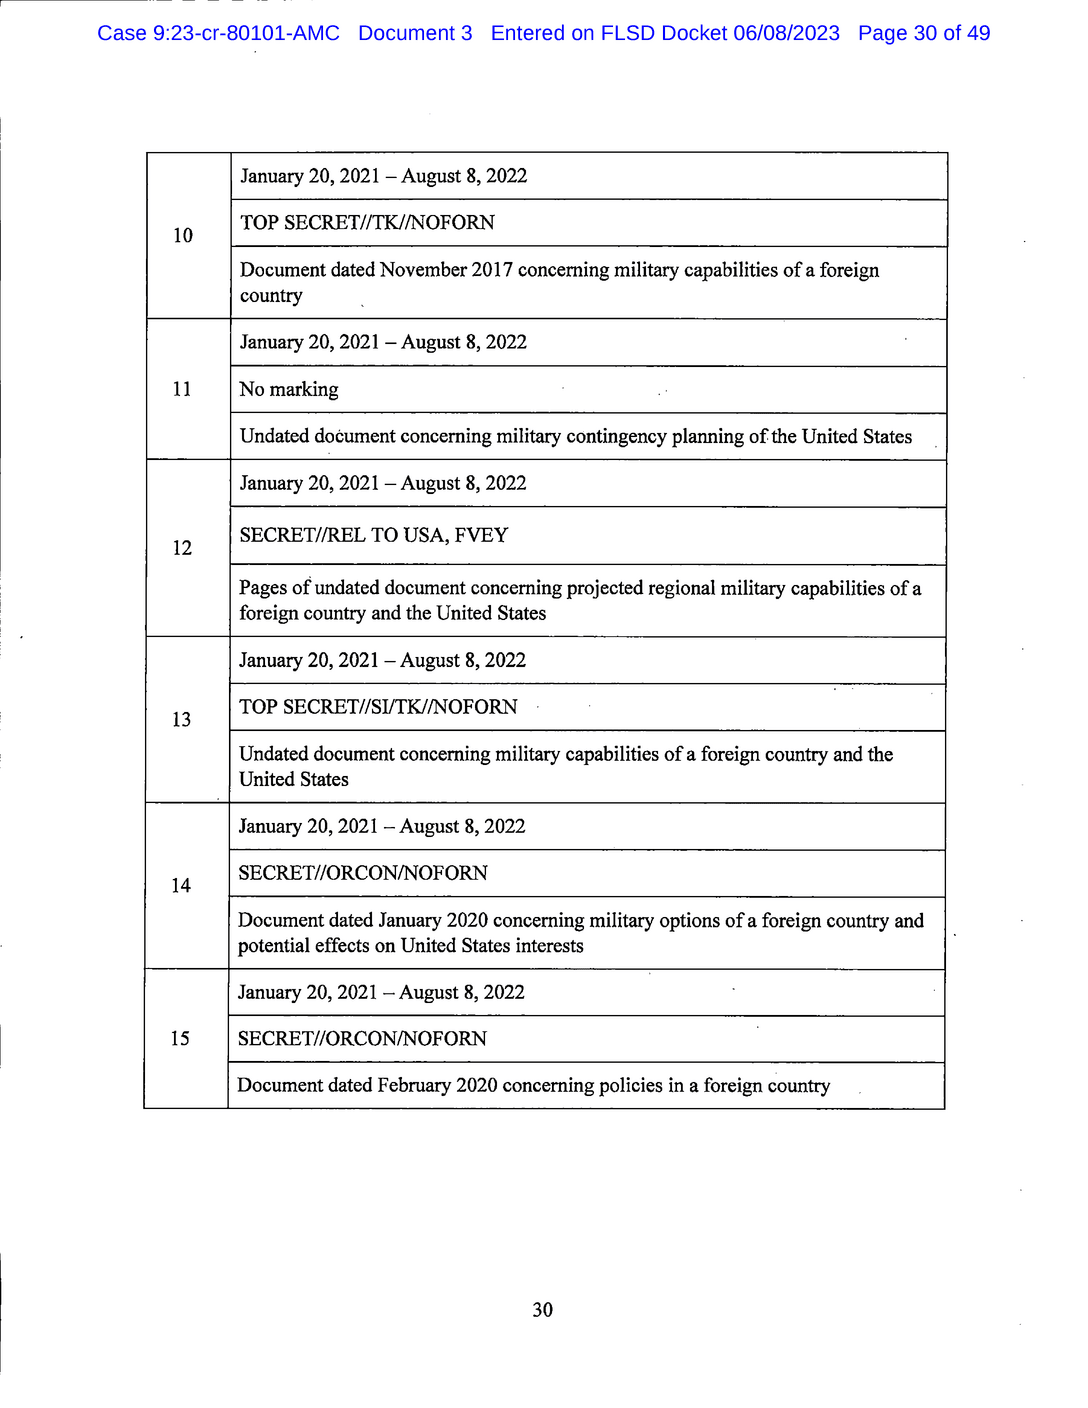 Page 30 of Donald Trump Classified Documents Indictment PDF document.